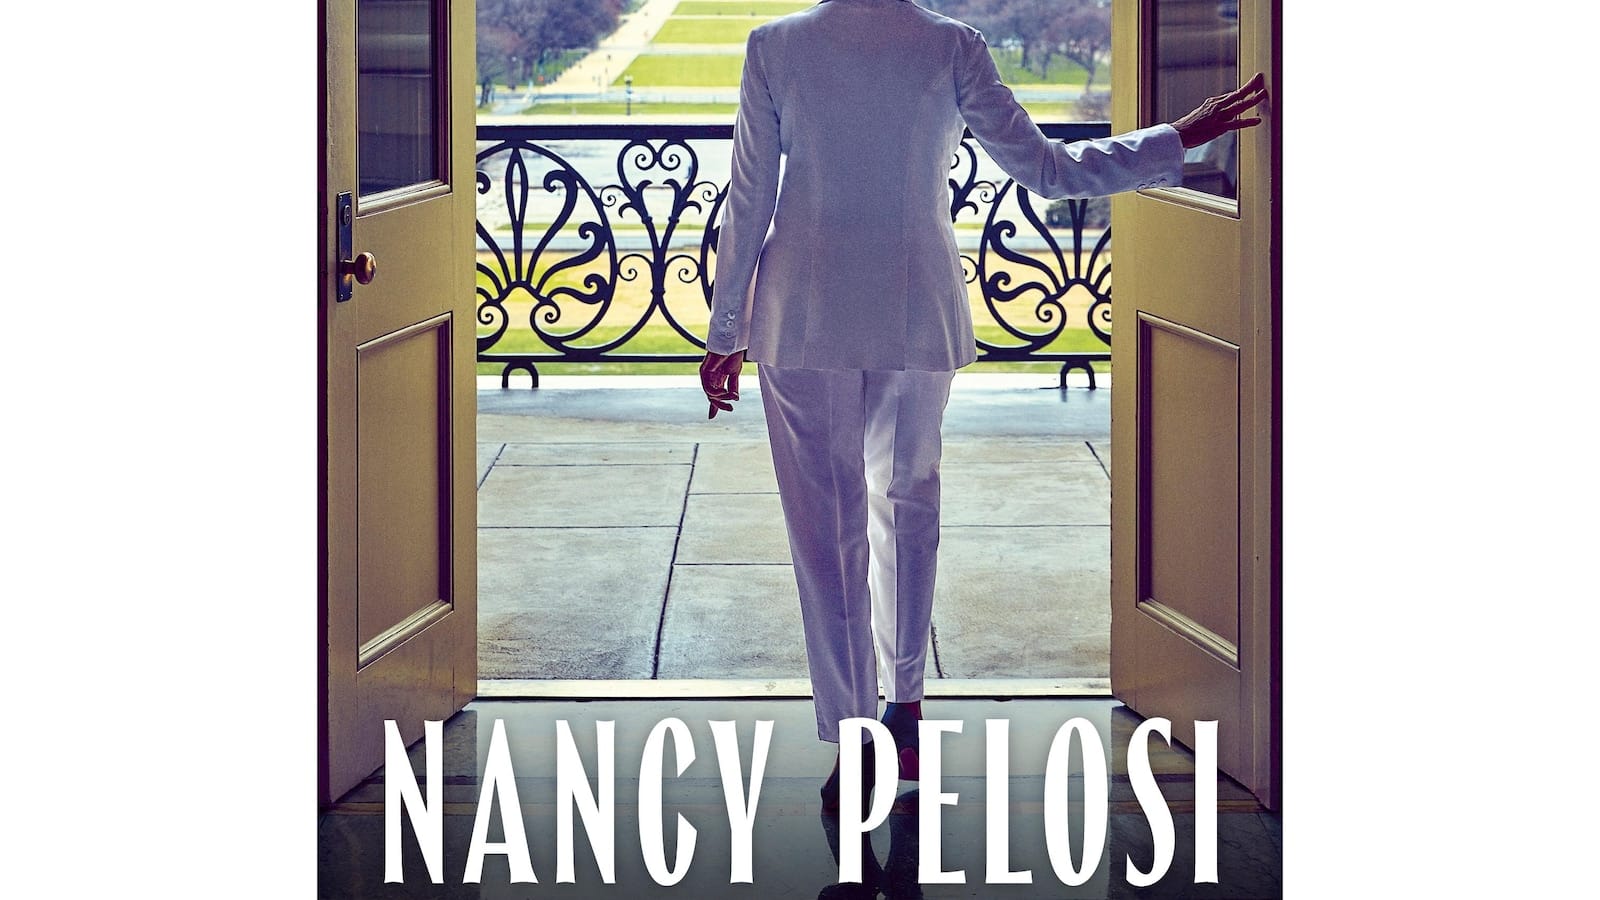 Nancy Pelosi book, ‘The Art of Power,’ will reflect on her career in public life